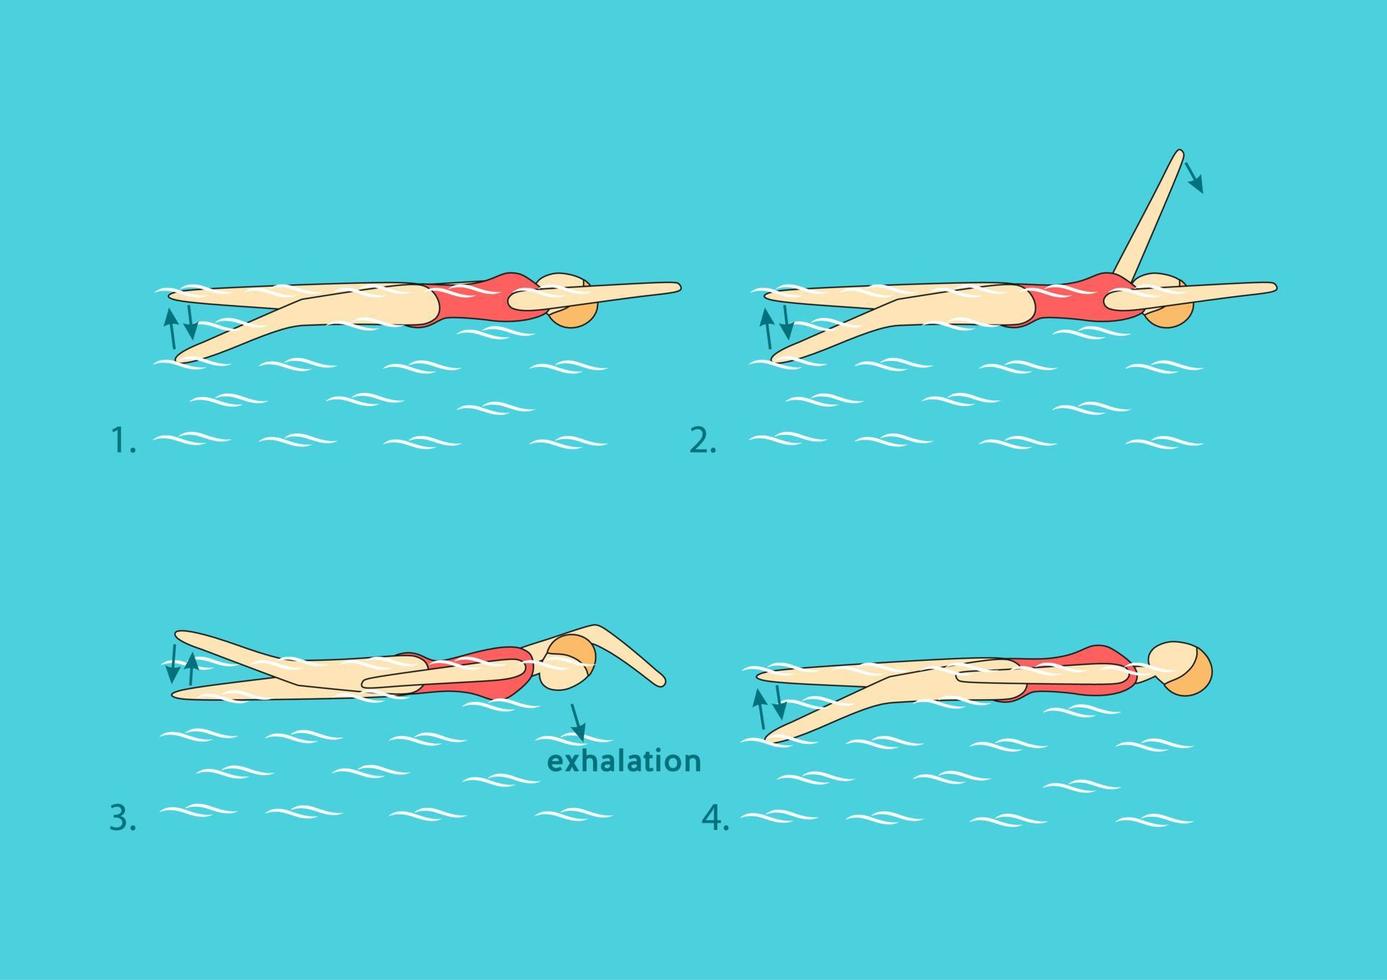 Backstroke with one arm extended forward and the upper arm close to the ear. Raise the other hand, turn on the chest to the side of the outstretched hand, exhale after immersing the head under water. vector